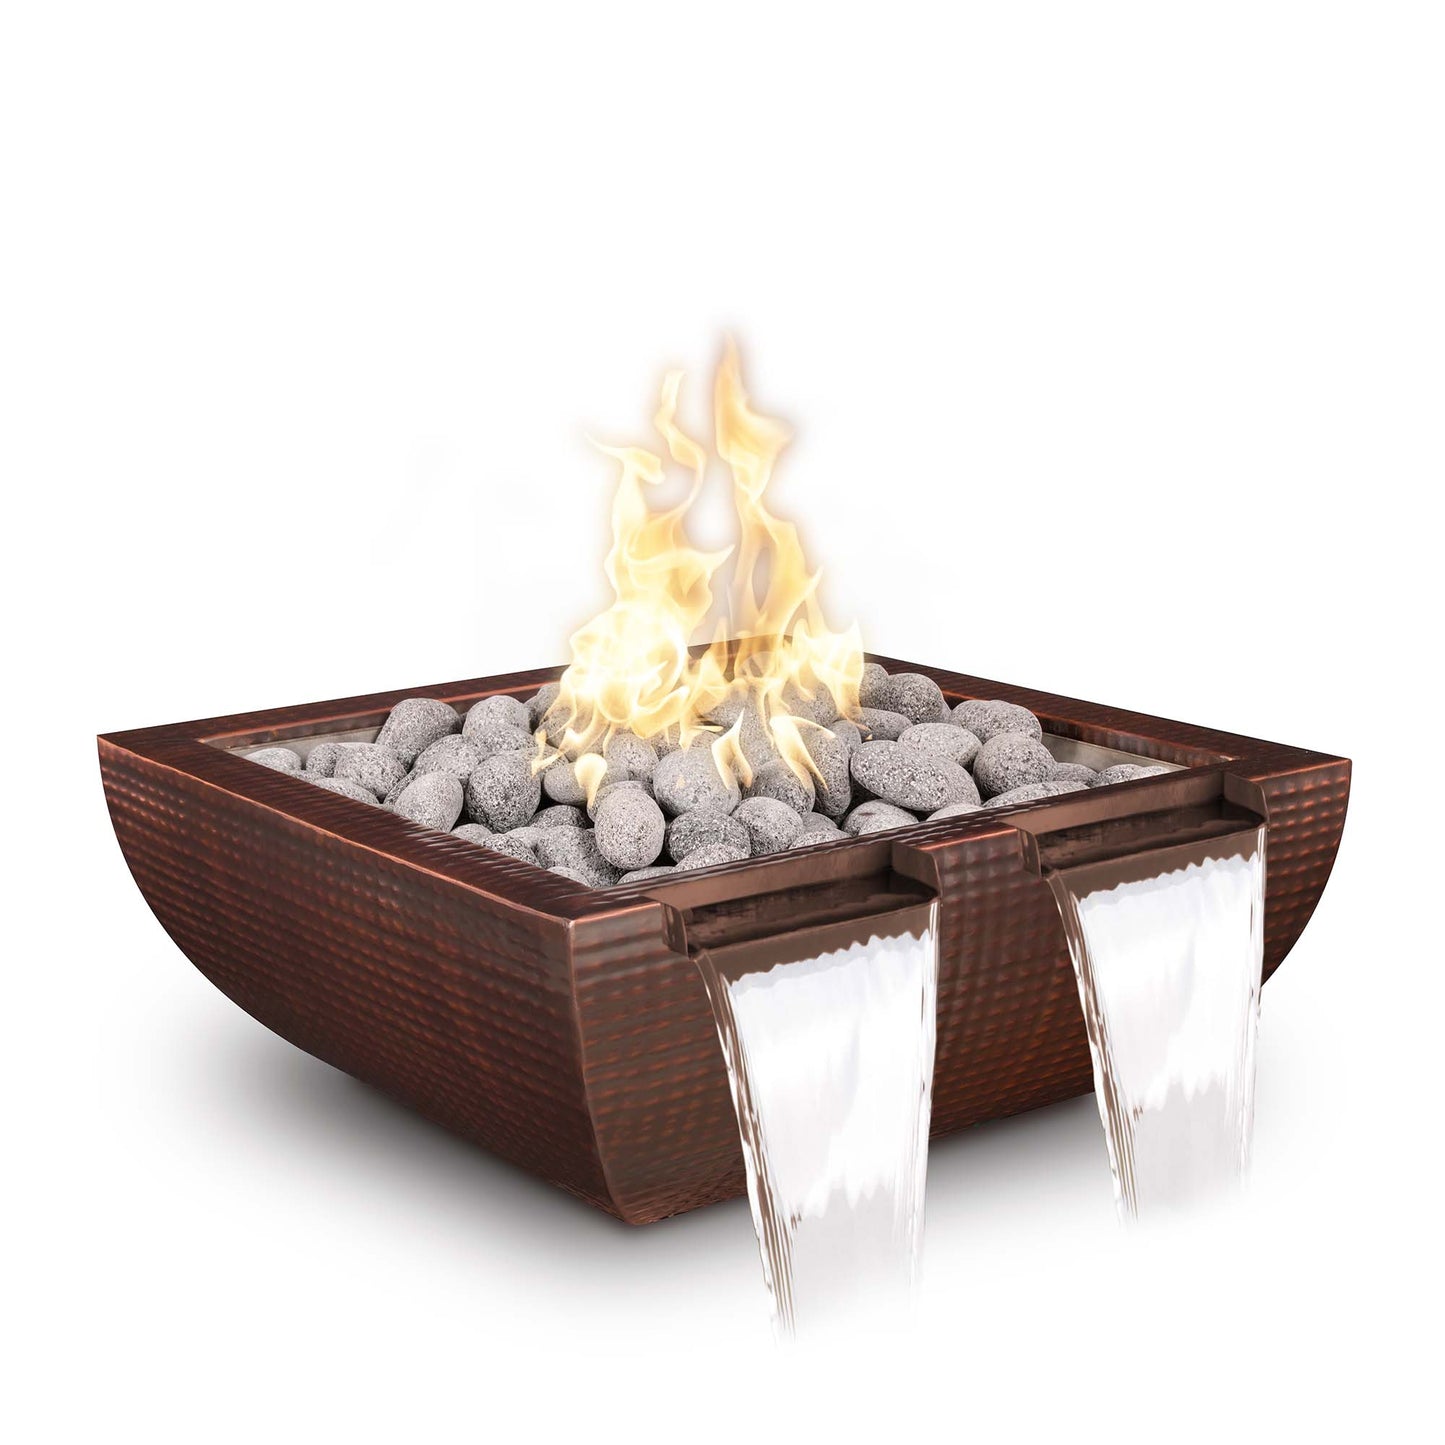 The Outdoor Plus Avalon Twin Spill 24" Copper Vein Powder Coated Metal Natural Gas Fire & Water Bowl with Match Lit with Flame Sense Ignition